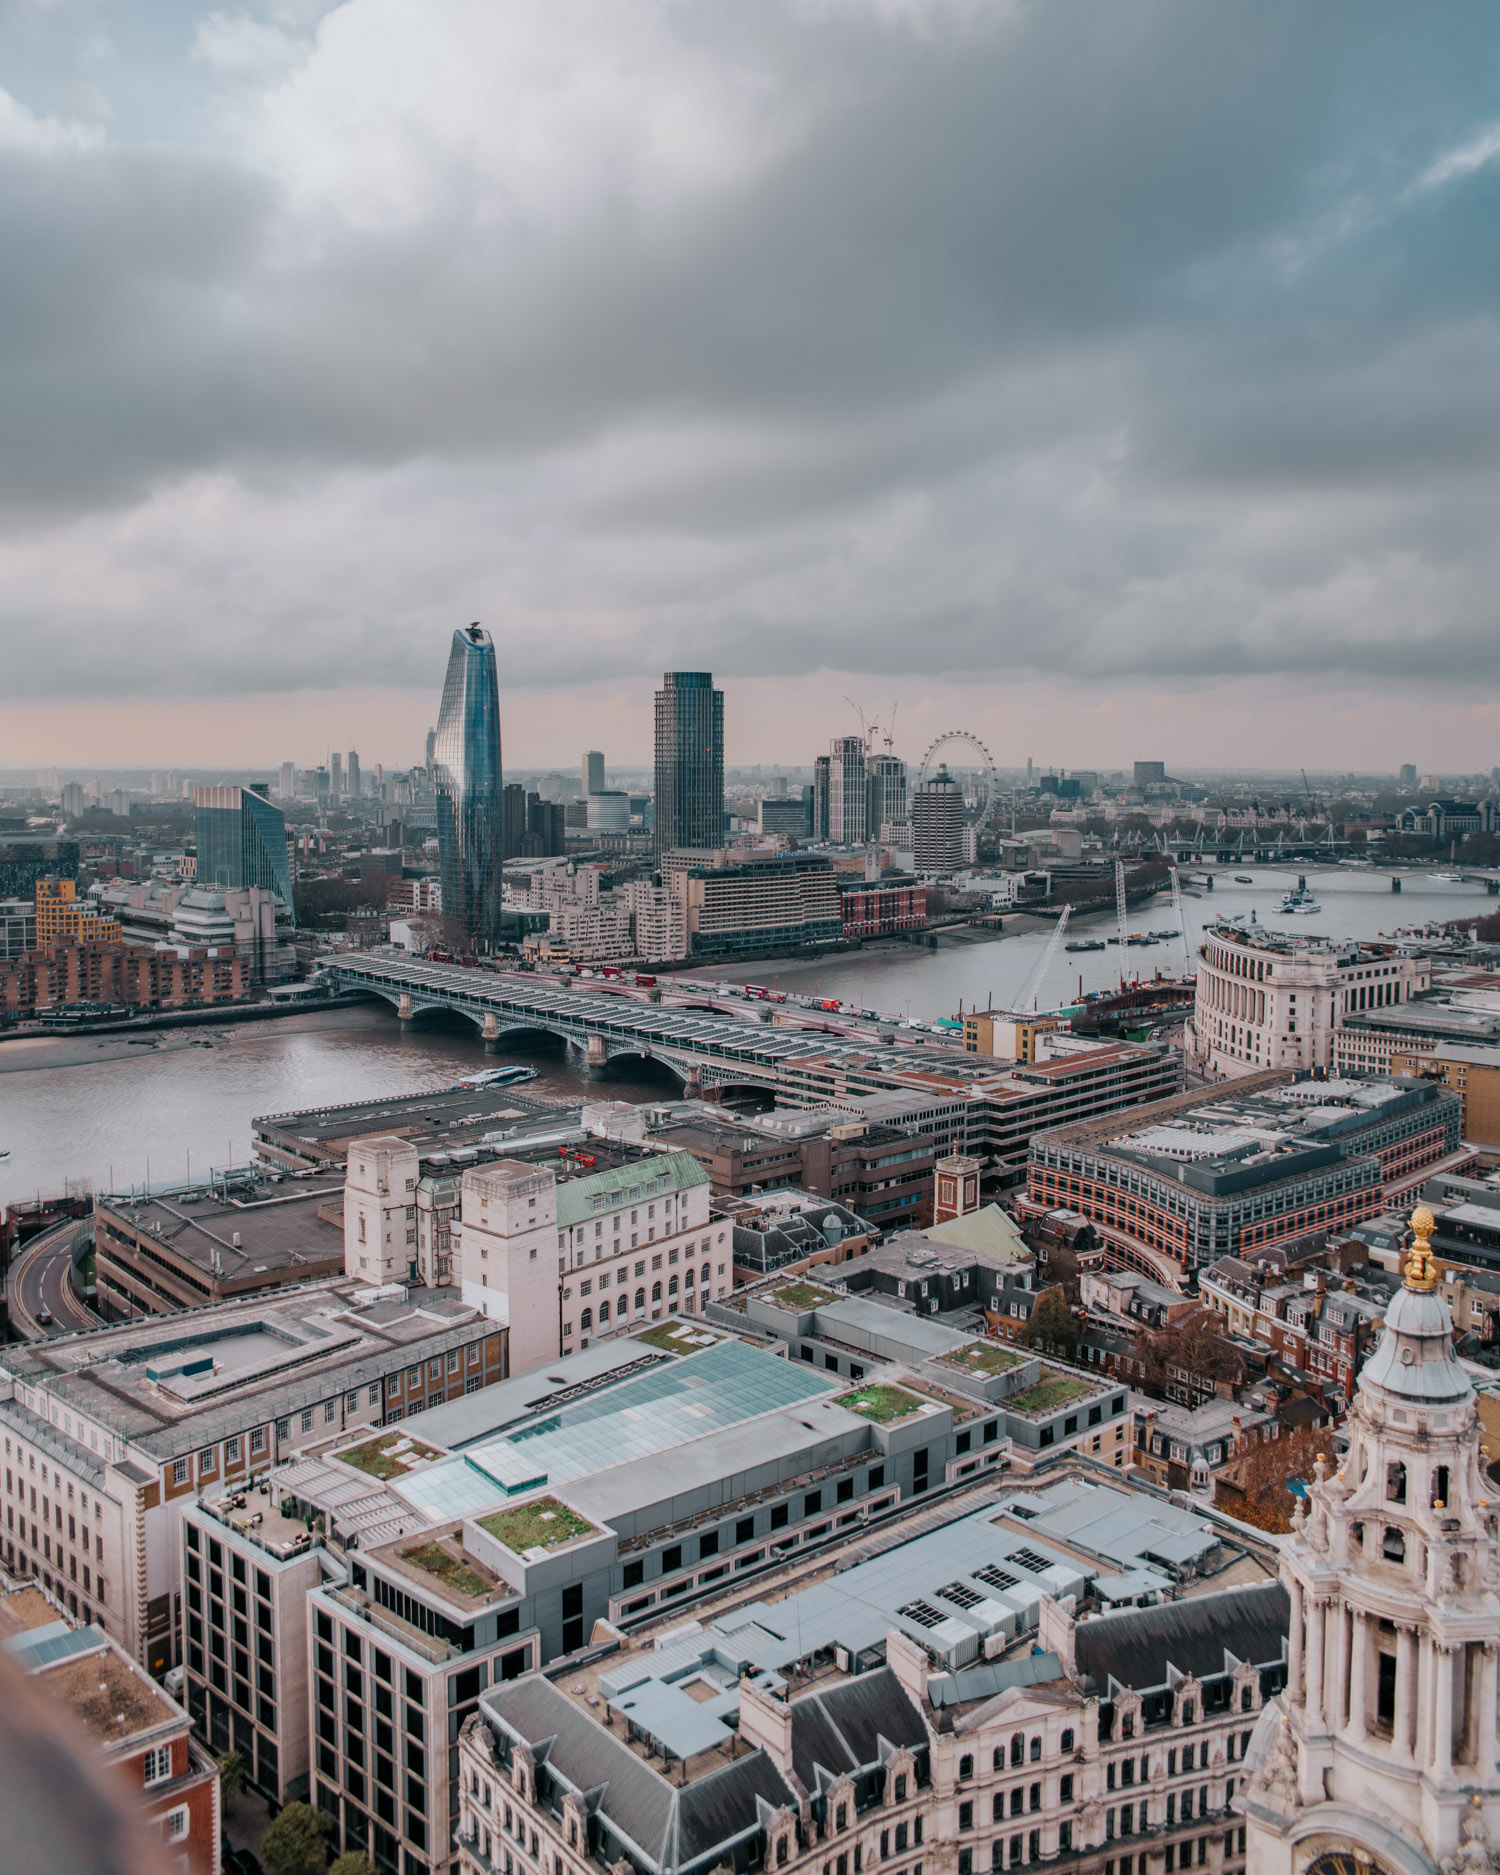 View from St. Paul's Cathedral in London